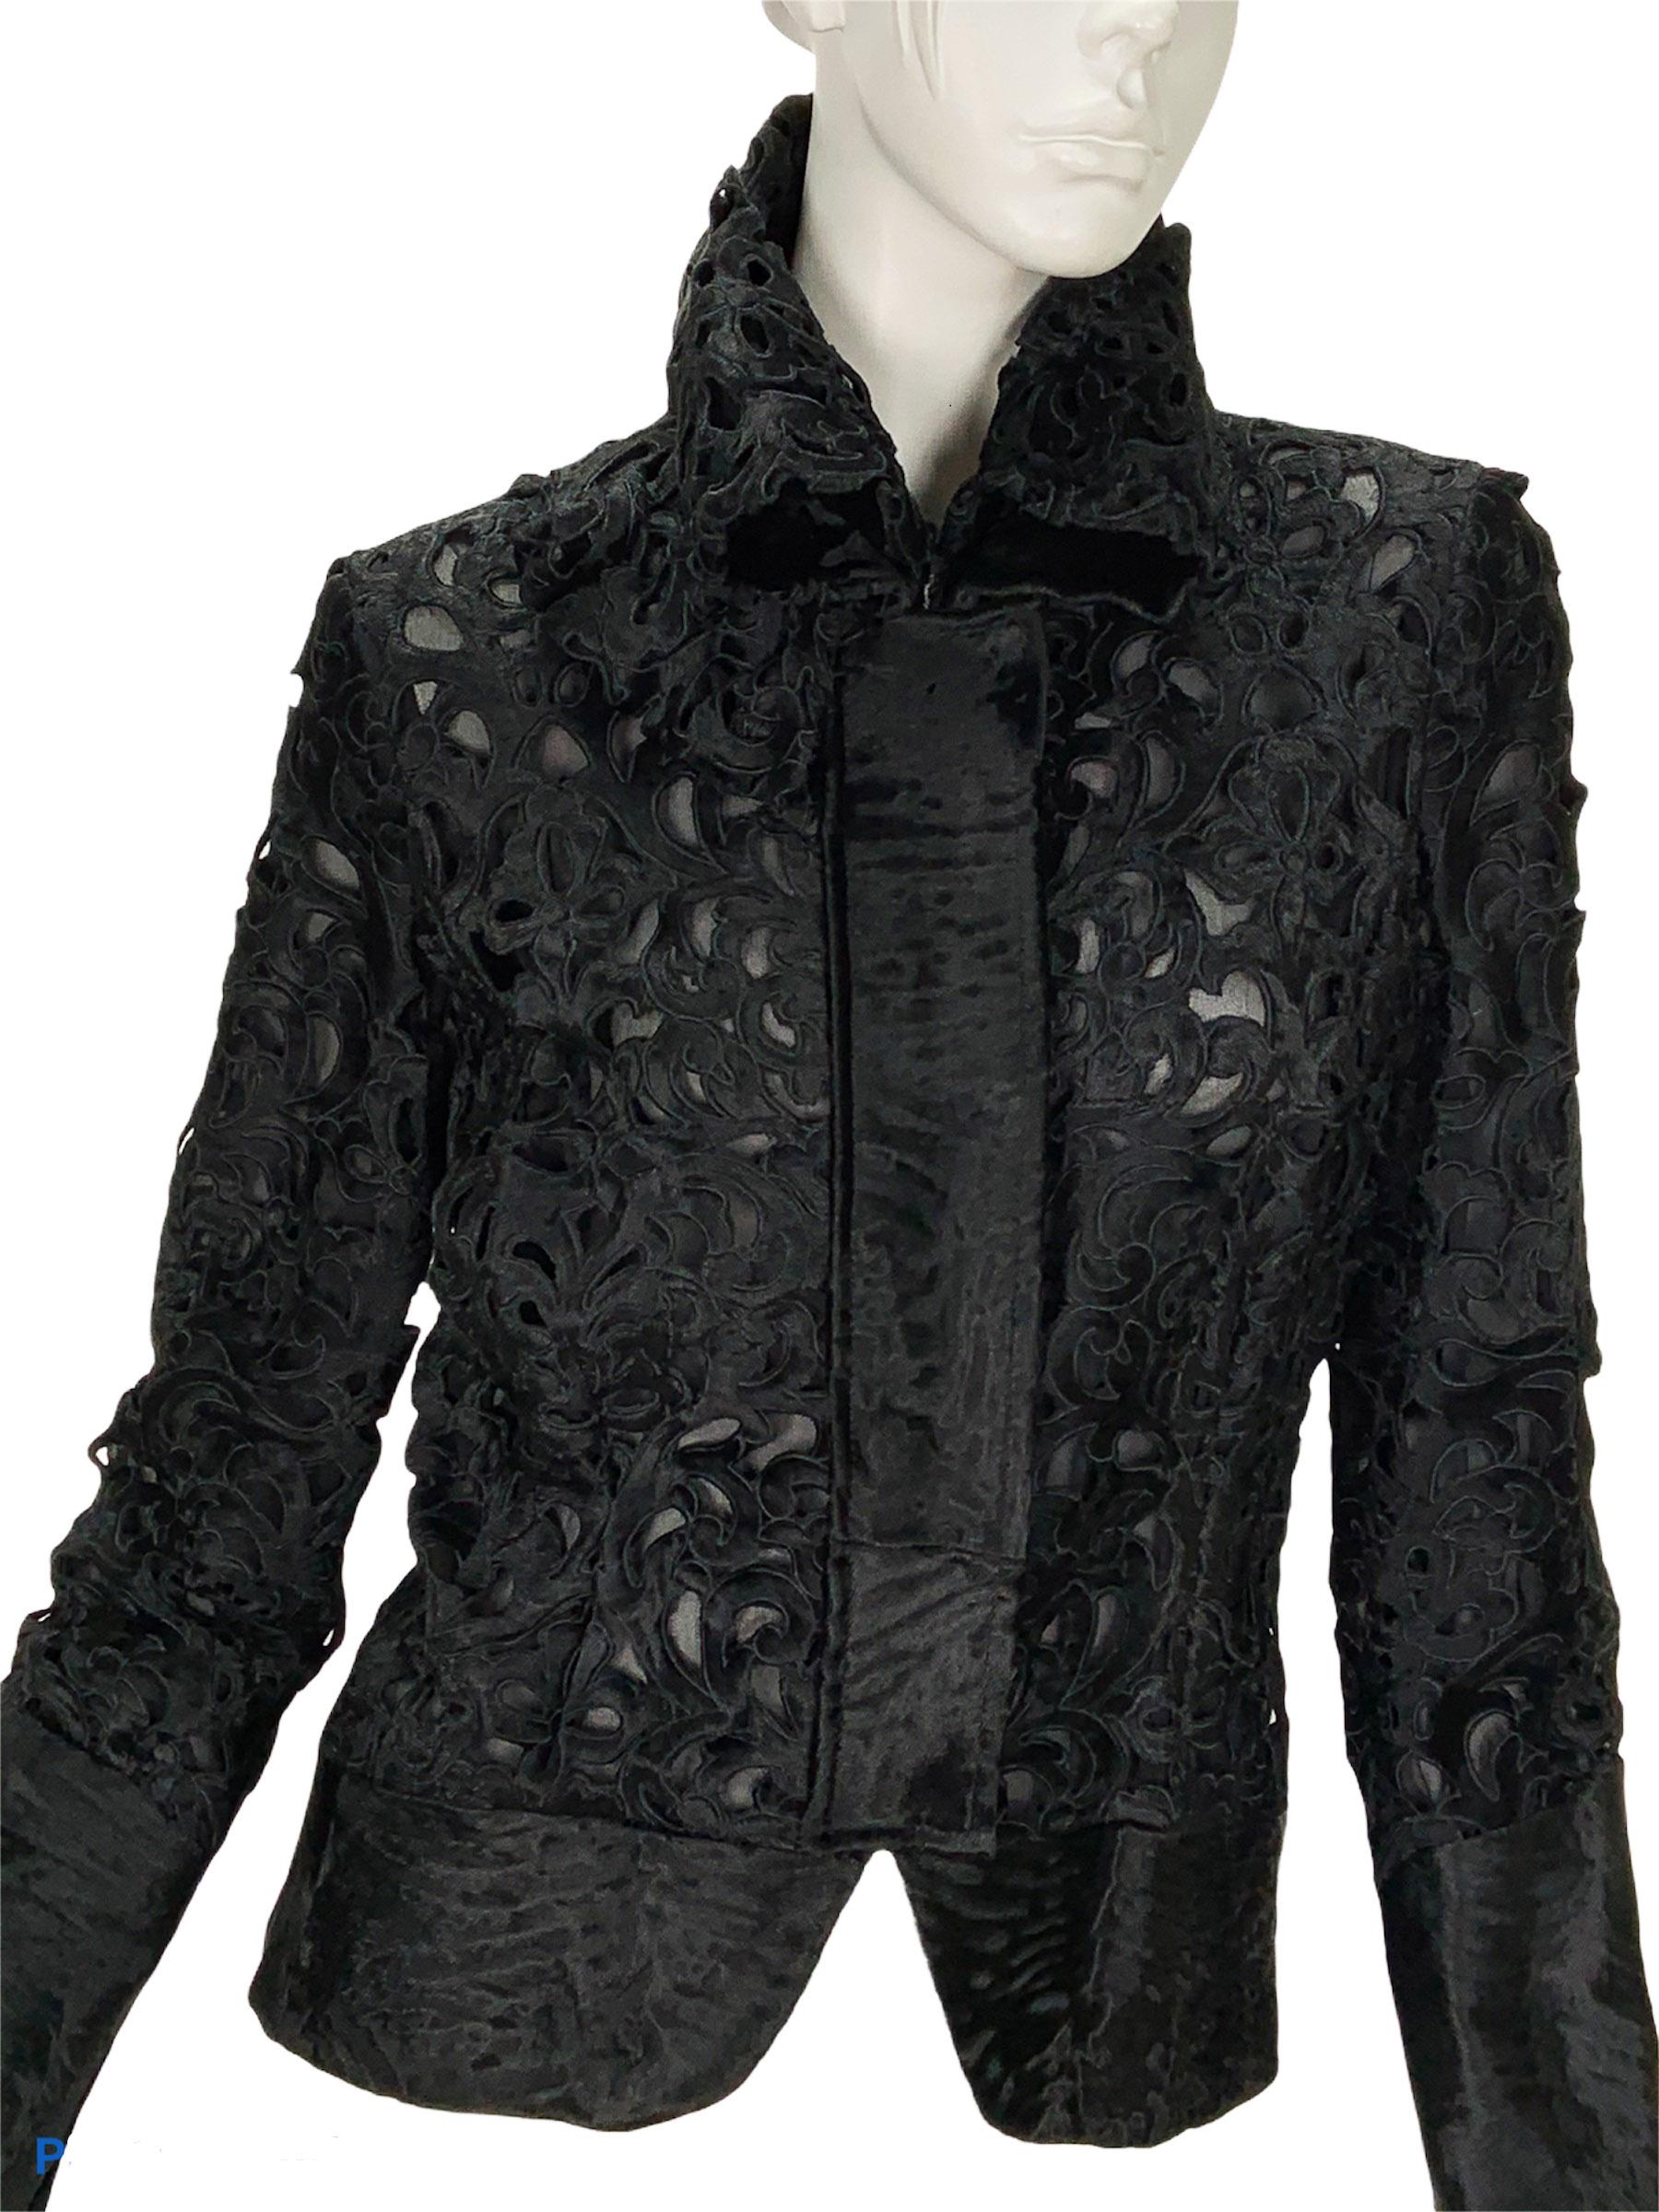 Limited Edition!!!
New Tom Ford for Gucci Astrakhan Fur Fitted Jacket
F/W 2004 Collection
Designer size 42 - US 6
100% Real Fur, Laser Cut and Embroidery, Oversize High Collar,  Decorative Bow.
100% Silk Lining, Front Snap Closure.
Measurements: